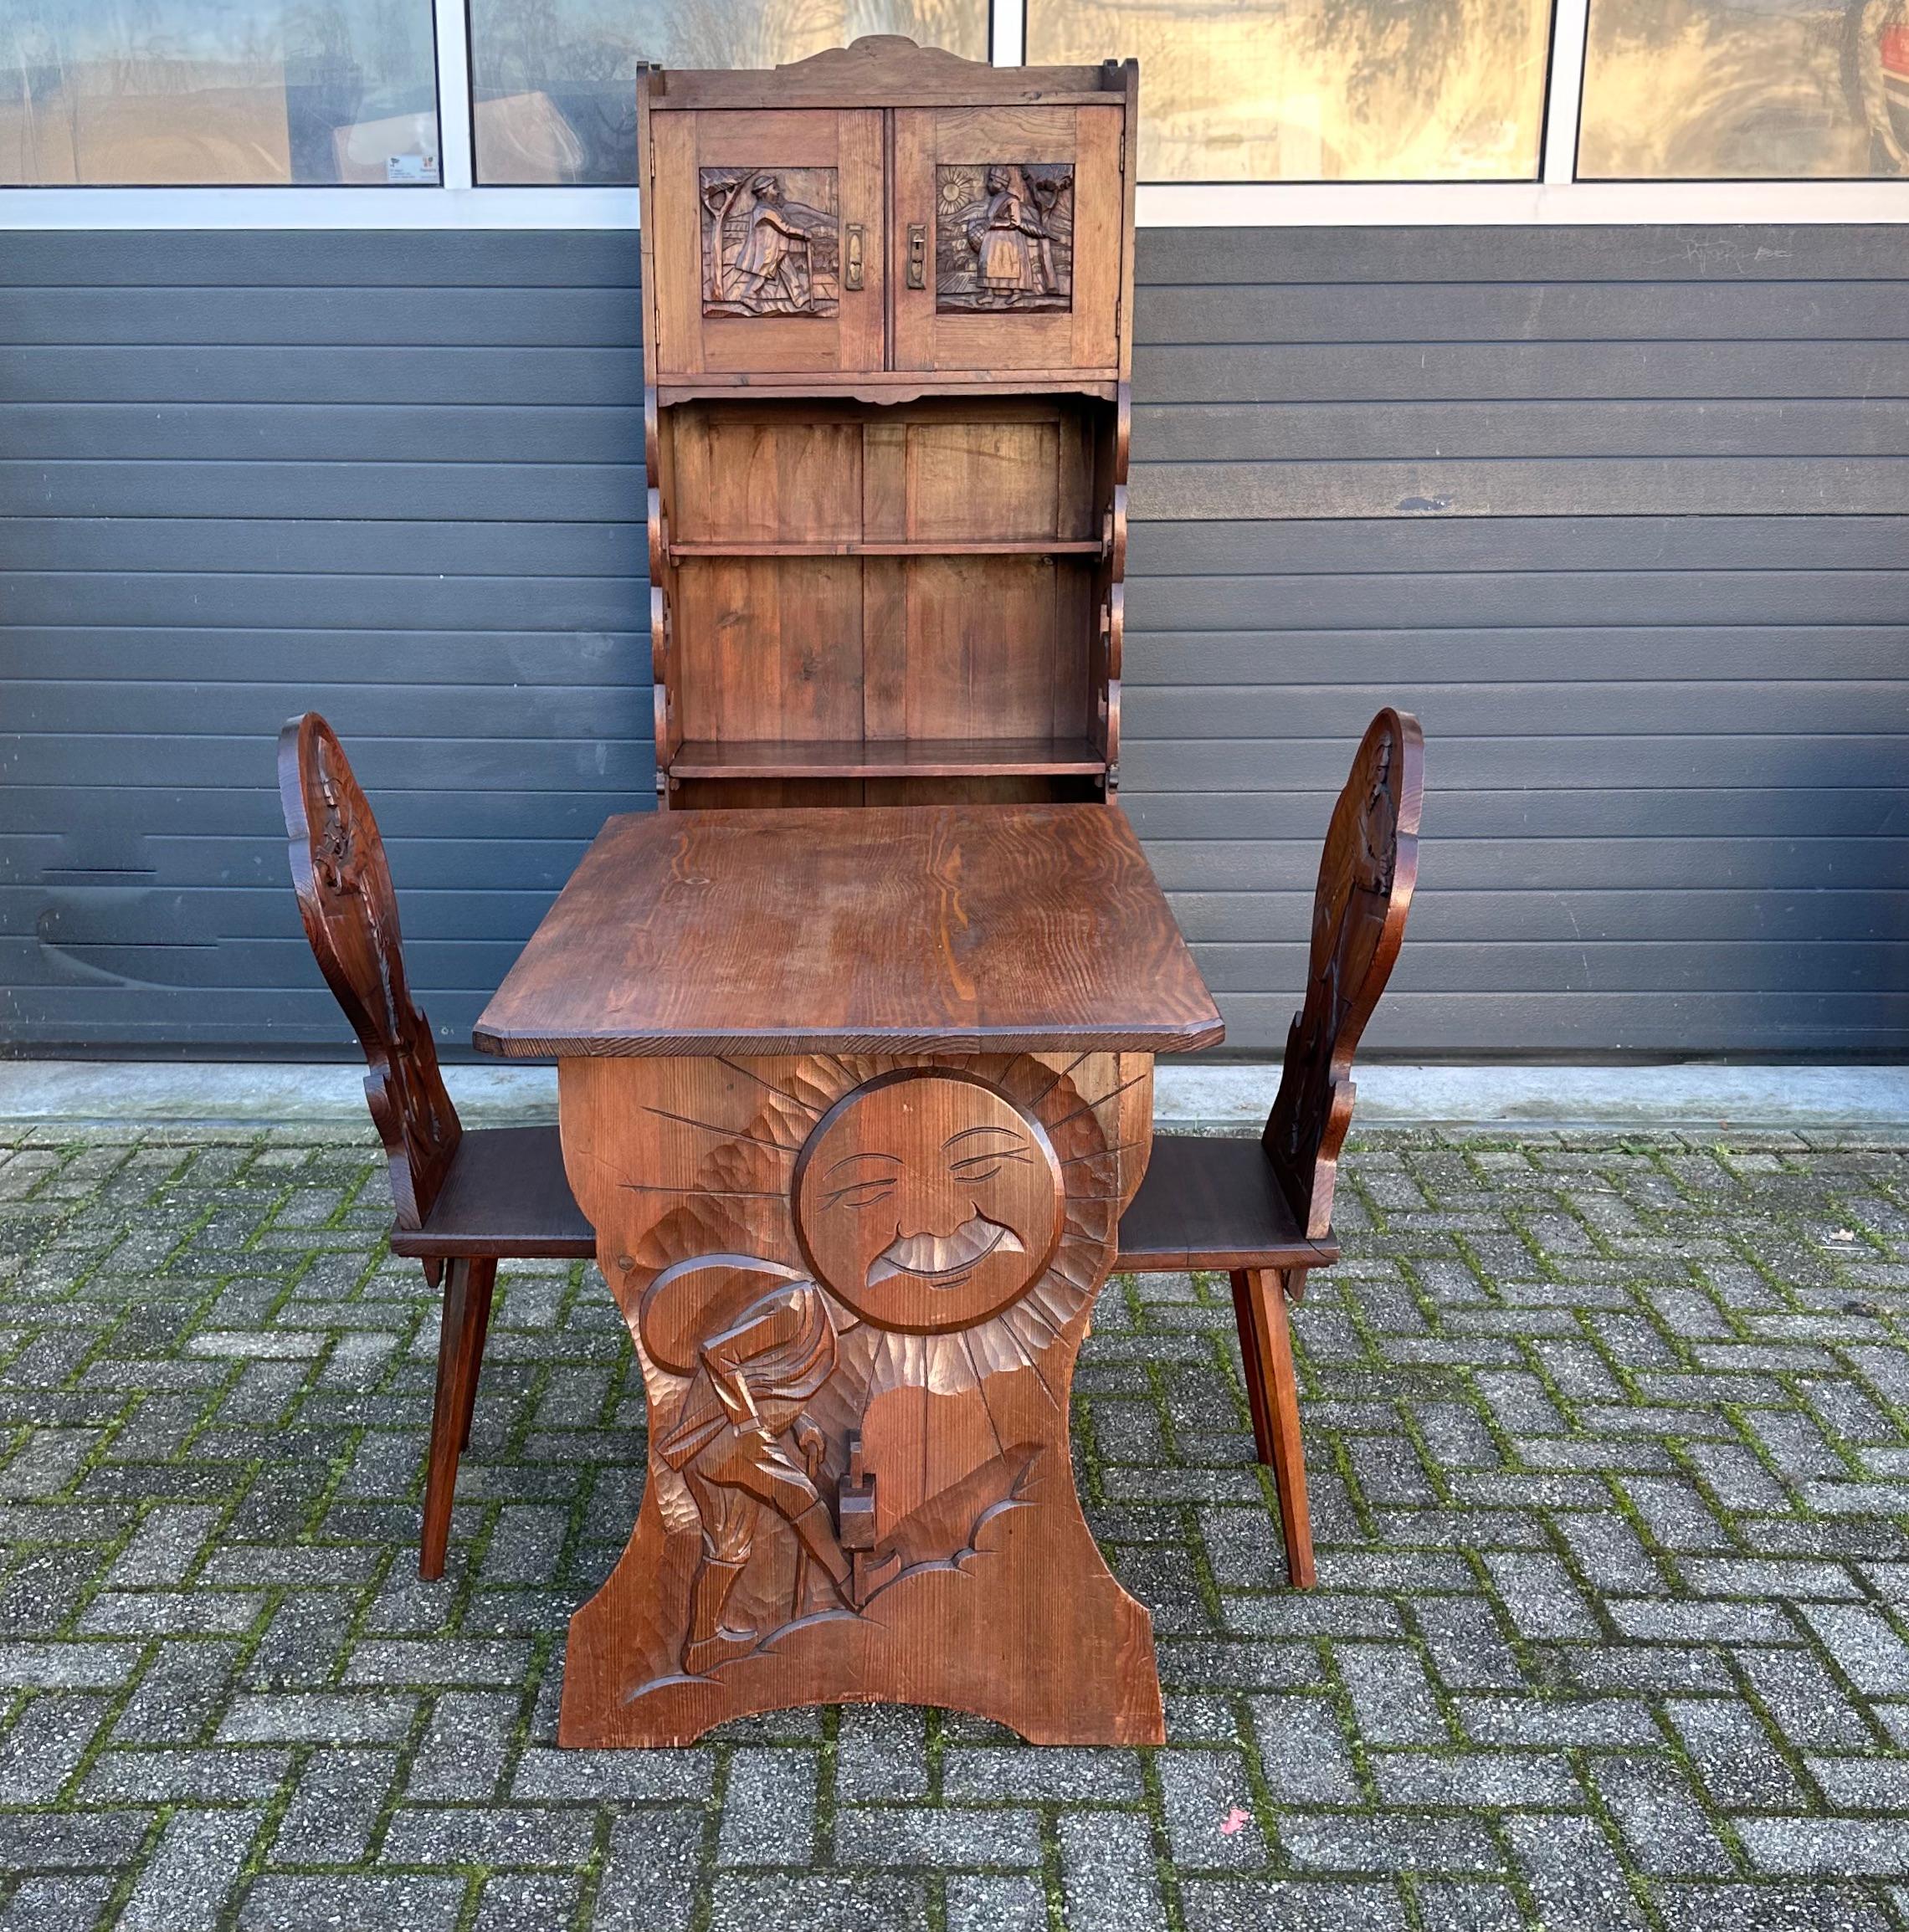 Rare folk art set with great carvings on cottage cupboard, table and matching chairs.

If you are looking for a unique set for your chalet, home, cottage or kitchen then this very rare and Swiss made cupboard, chairs and table could be perfect for